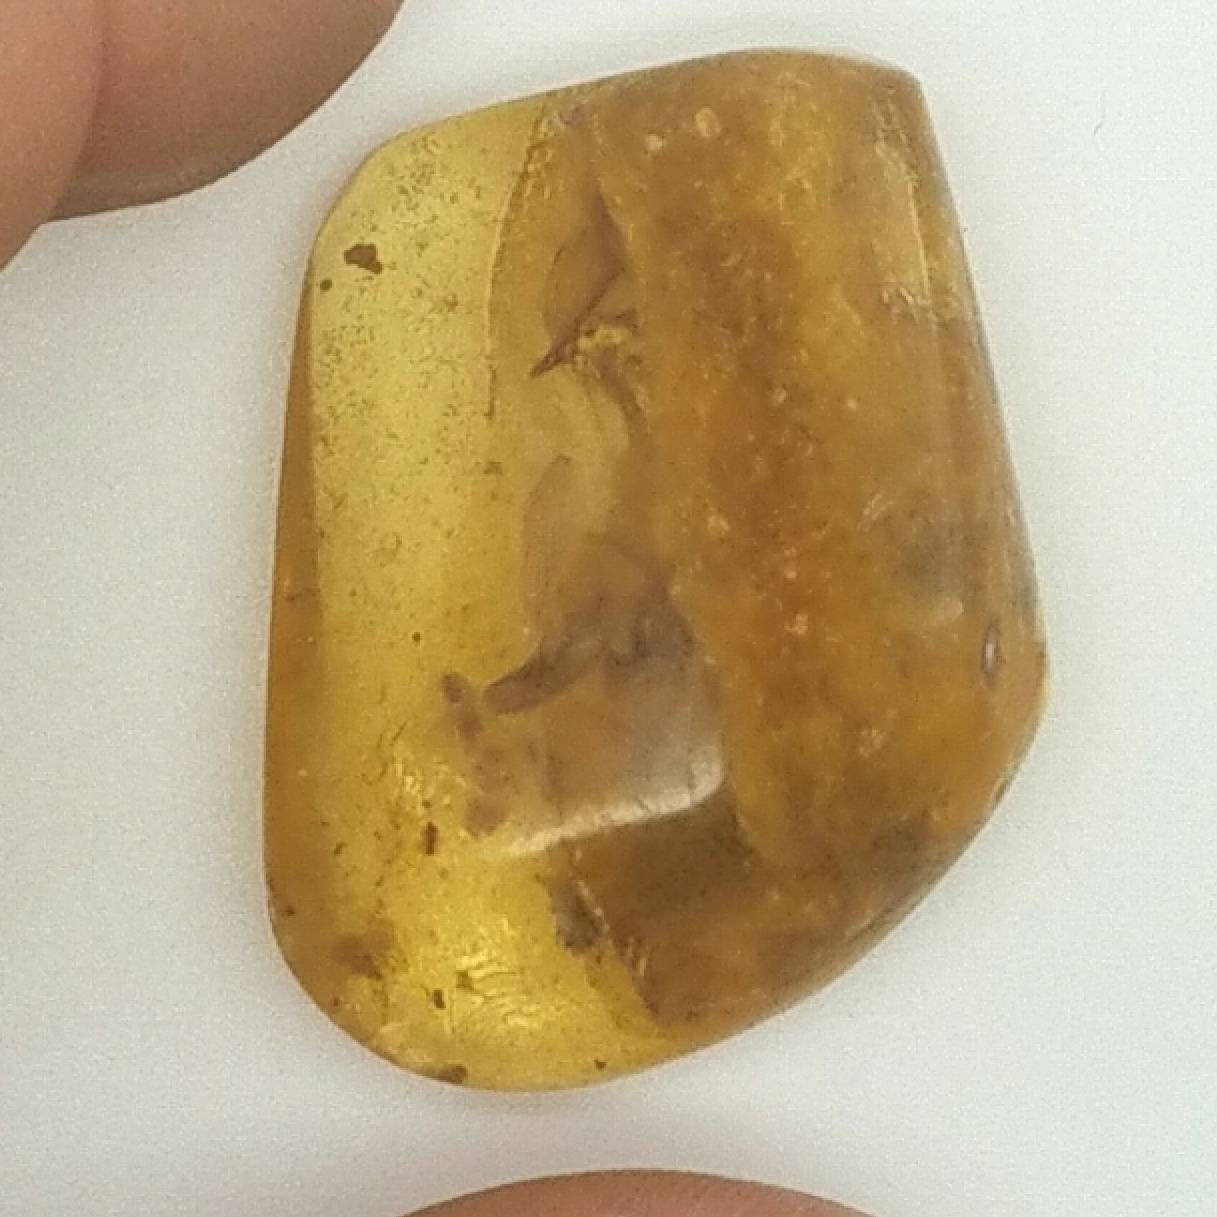 AMBER | Colombia | Polished A-18 | Fossil | Metaphysical |Bugs and Inclusions